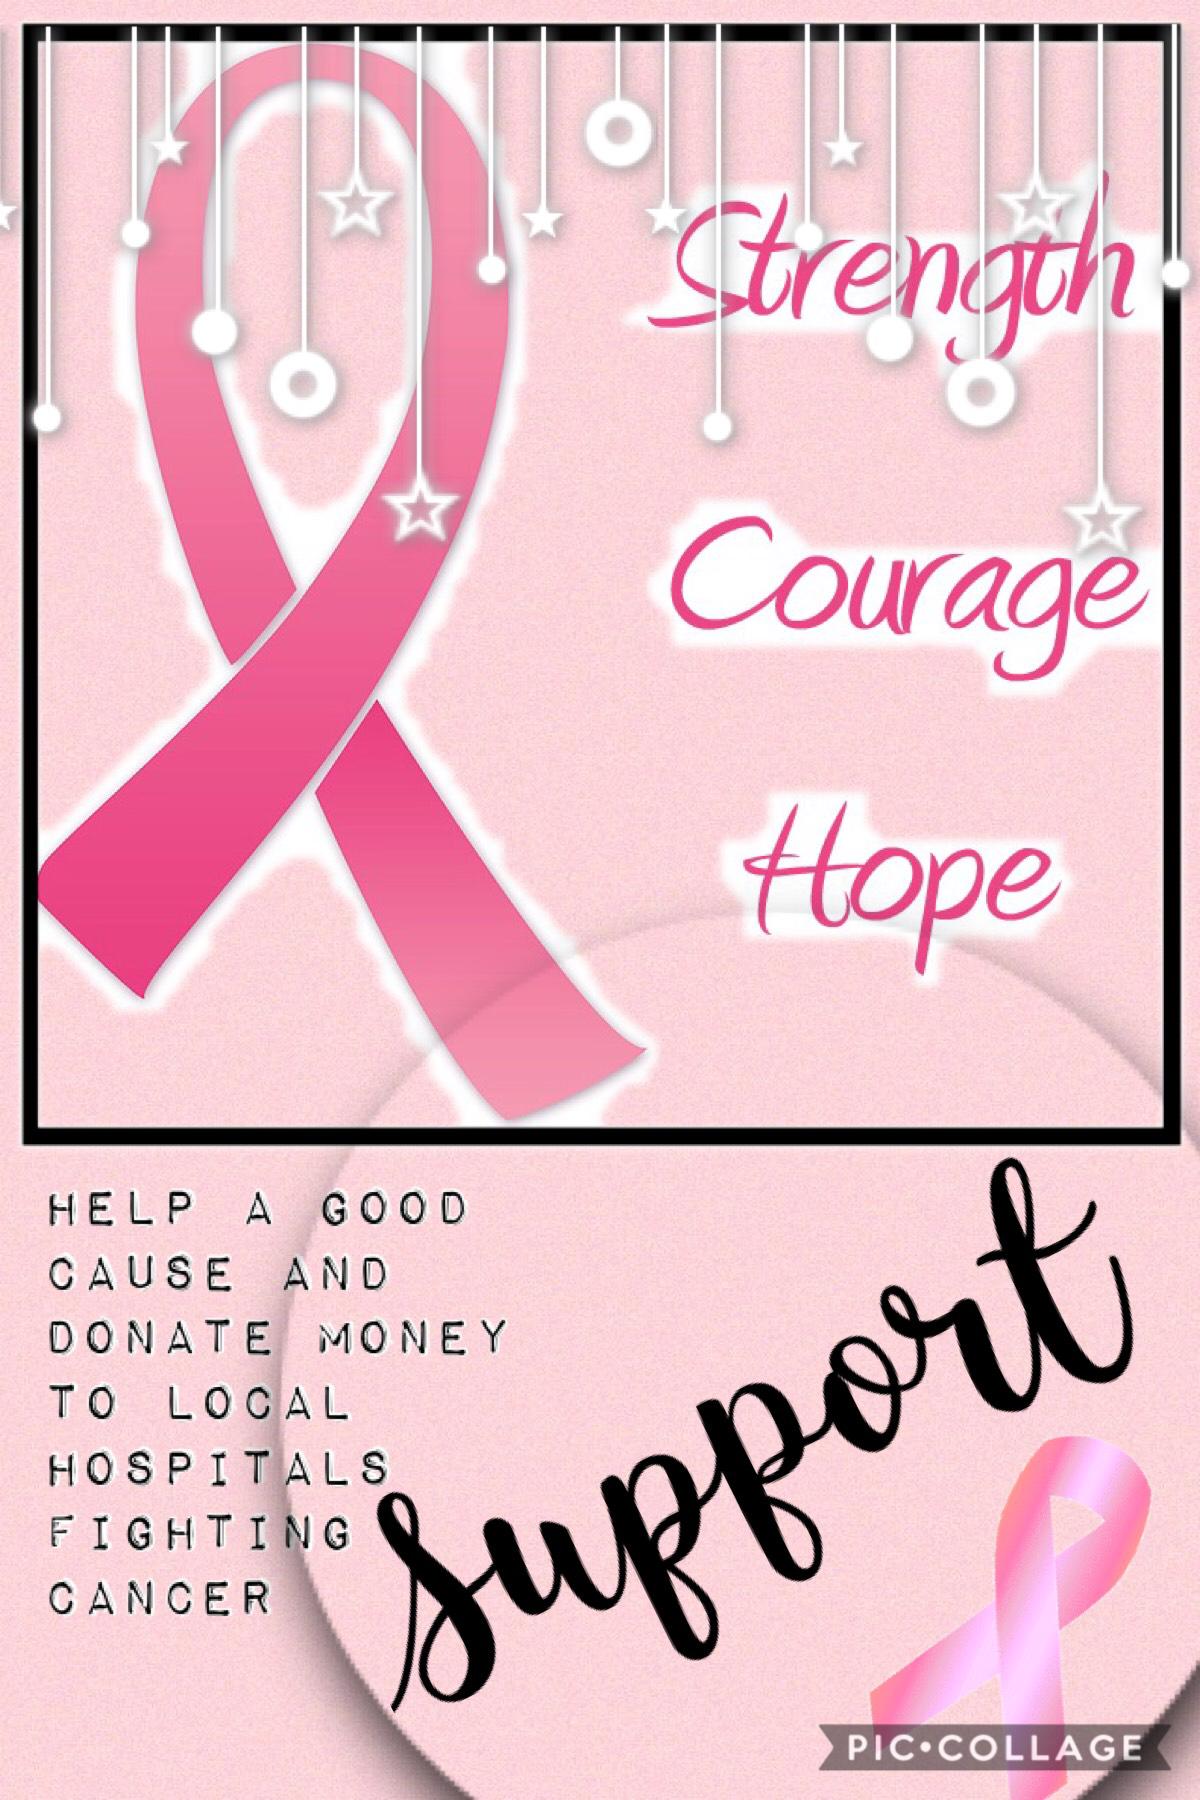 #supportcancer
Medicine is soooo so sooooo important. Please support the cause of cancer and send your love to local hospitals to help find new medicines to stop cancer. Be a fighter. To show me you will send just a few coins, follow me or  like this caus